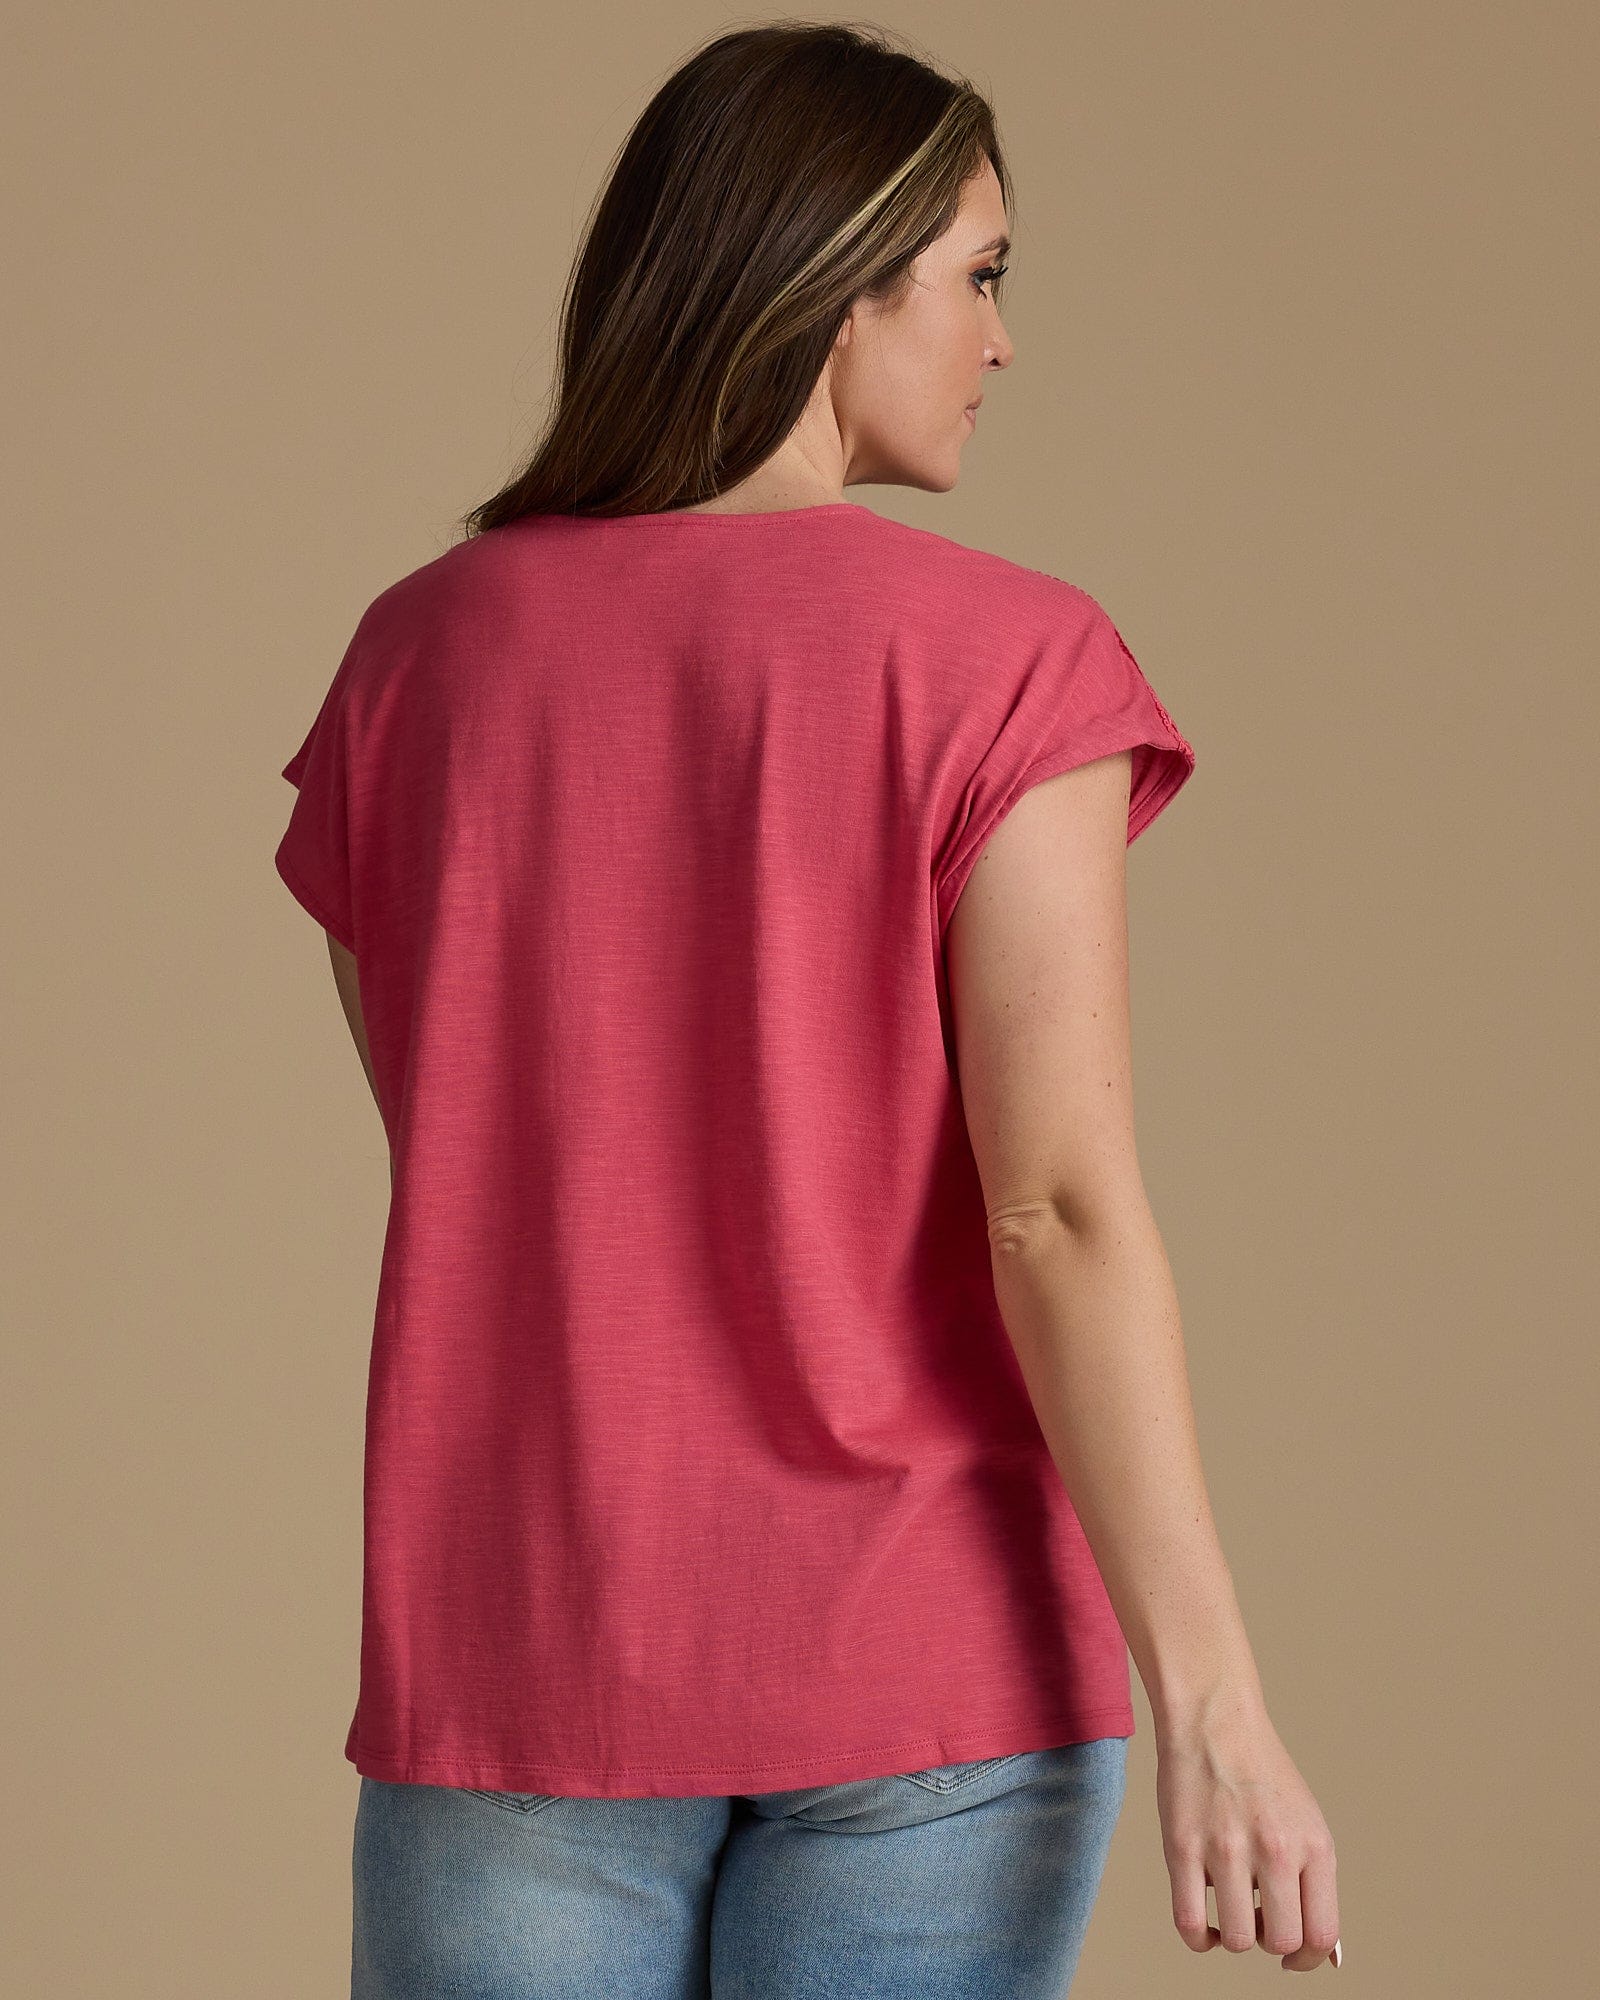 Woman in a pink v-neck top